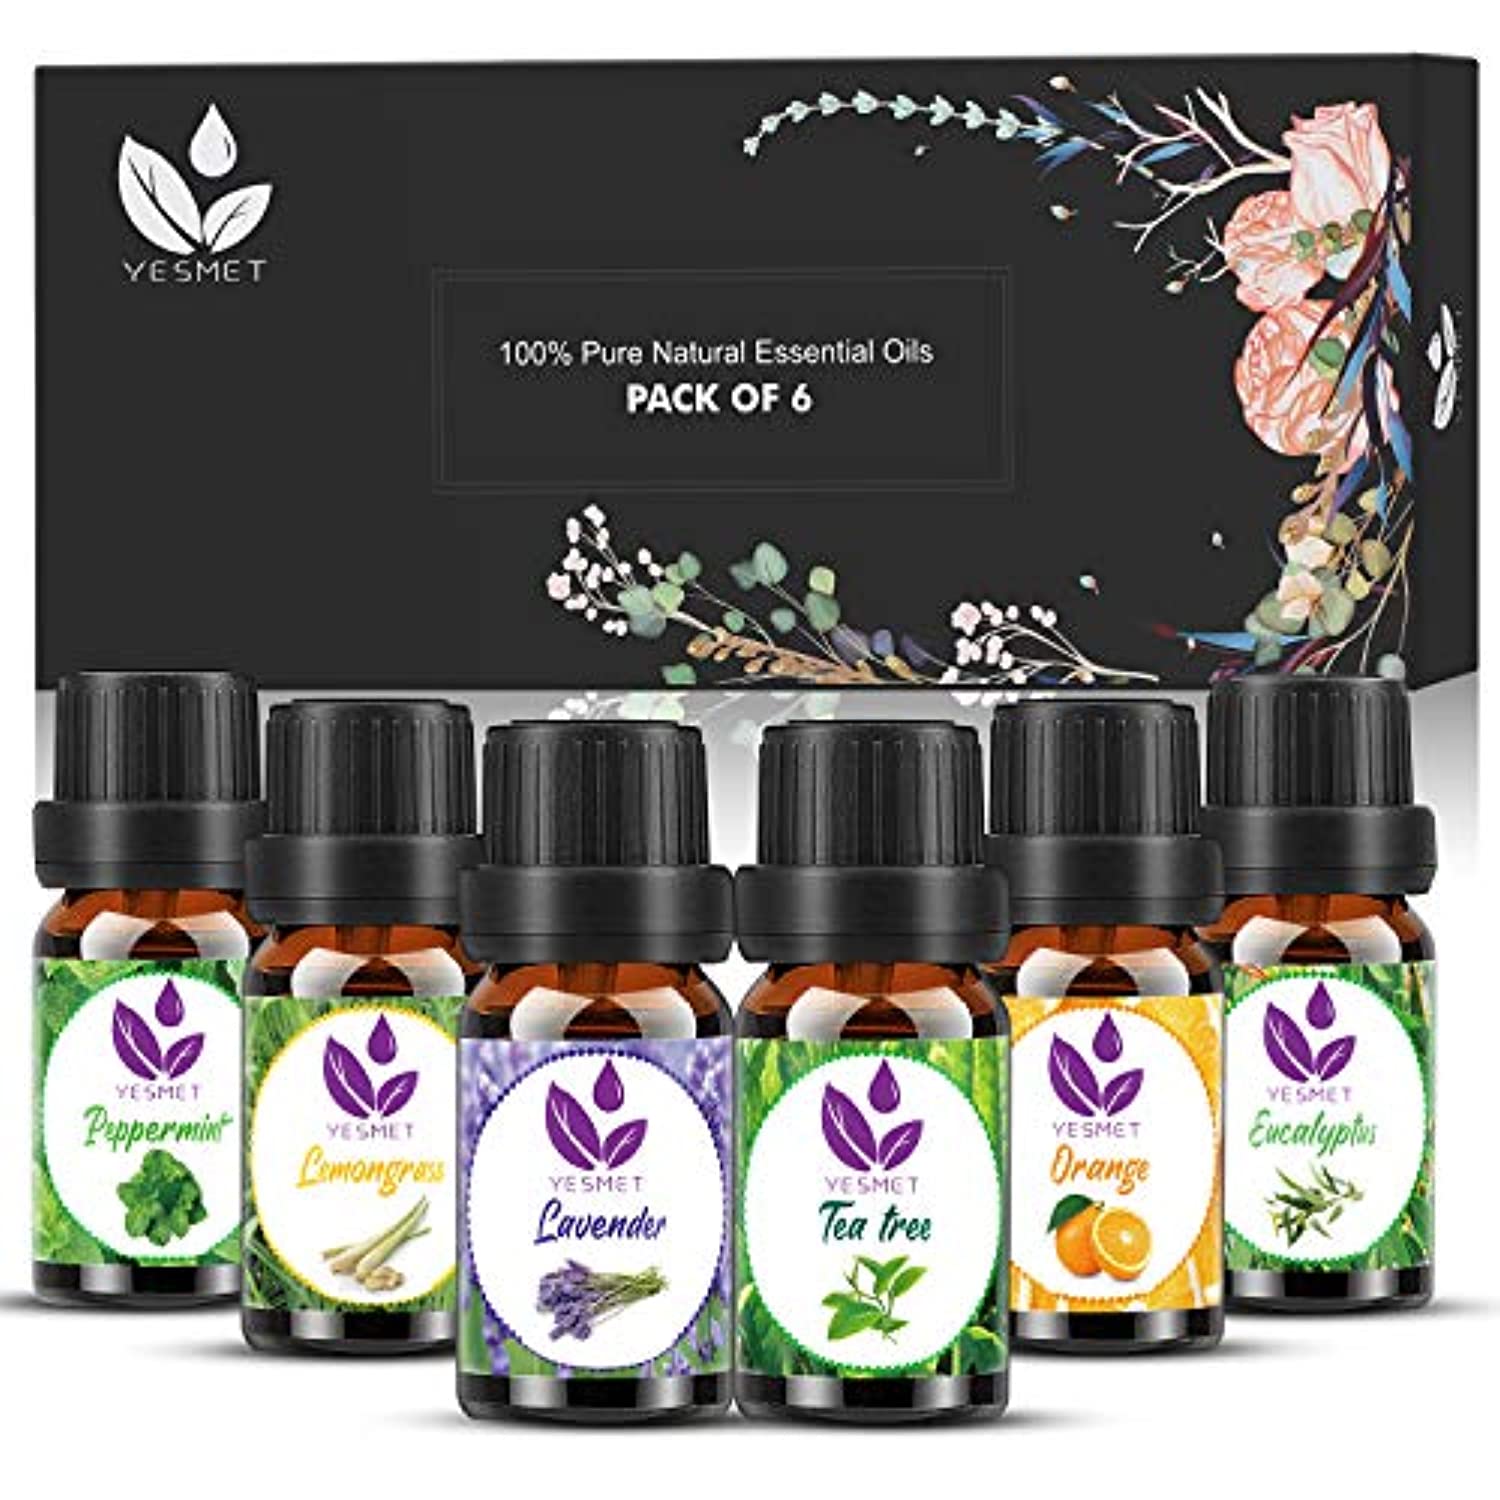 Pure and Natural Essential Oils, Great for Aromatherapy